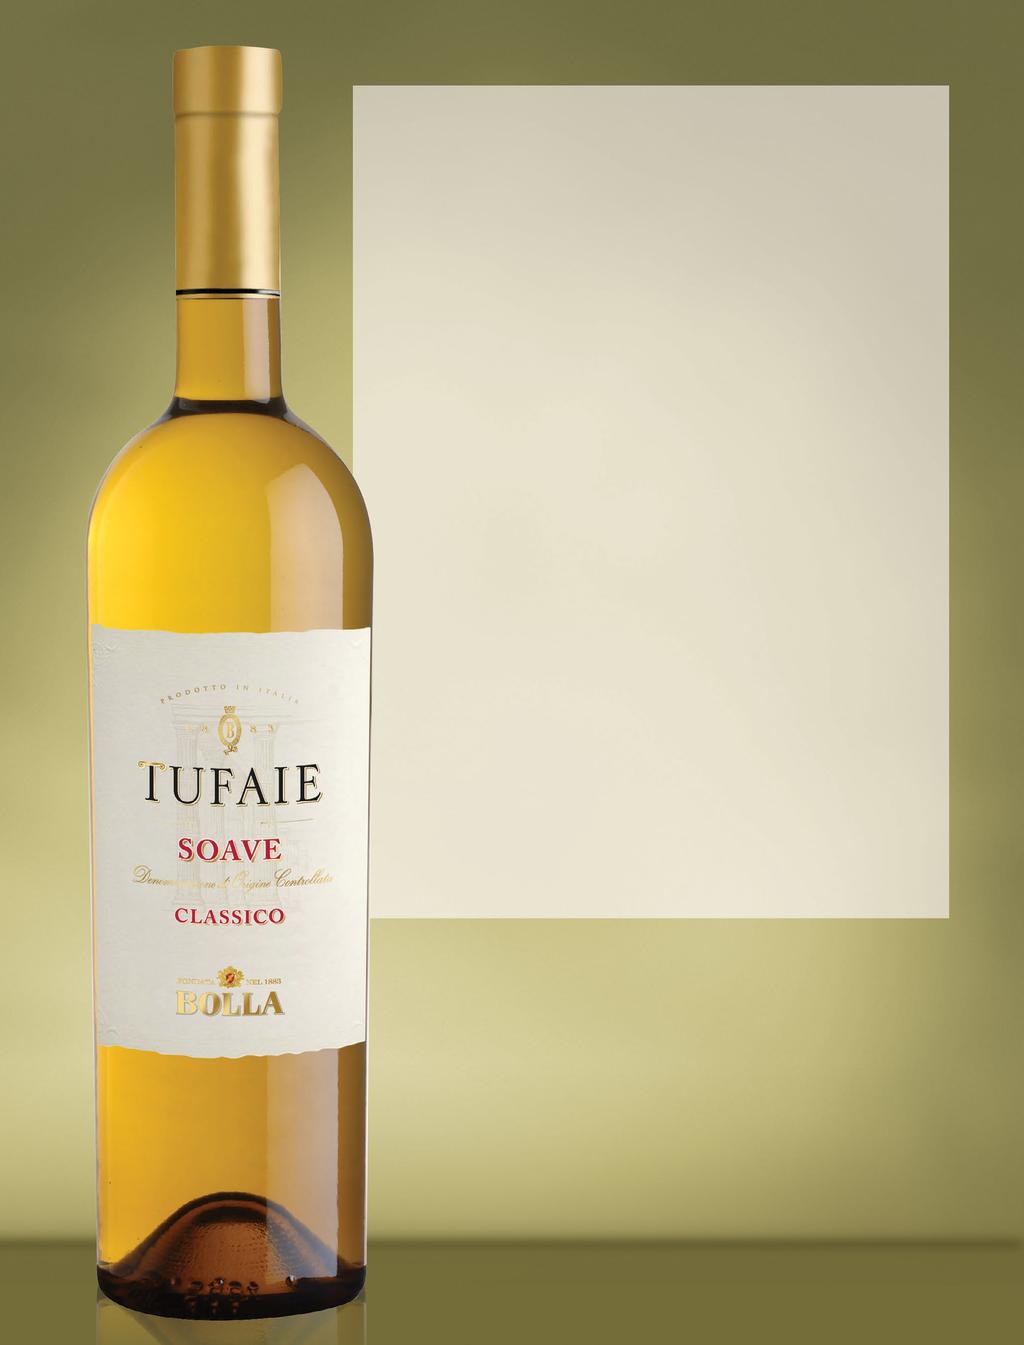 S U P E R P R E M I U M T I E R TUFAIE DESCRIPTION SHEET Tufaie (too-fai-ay) Soave Classico doc Production Area: Hills of Soave in the heart of the Classico zone, Italy.